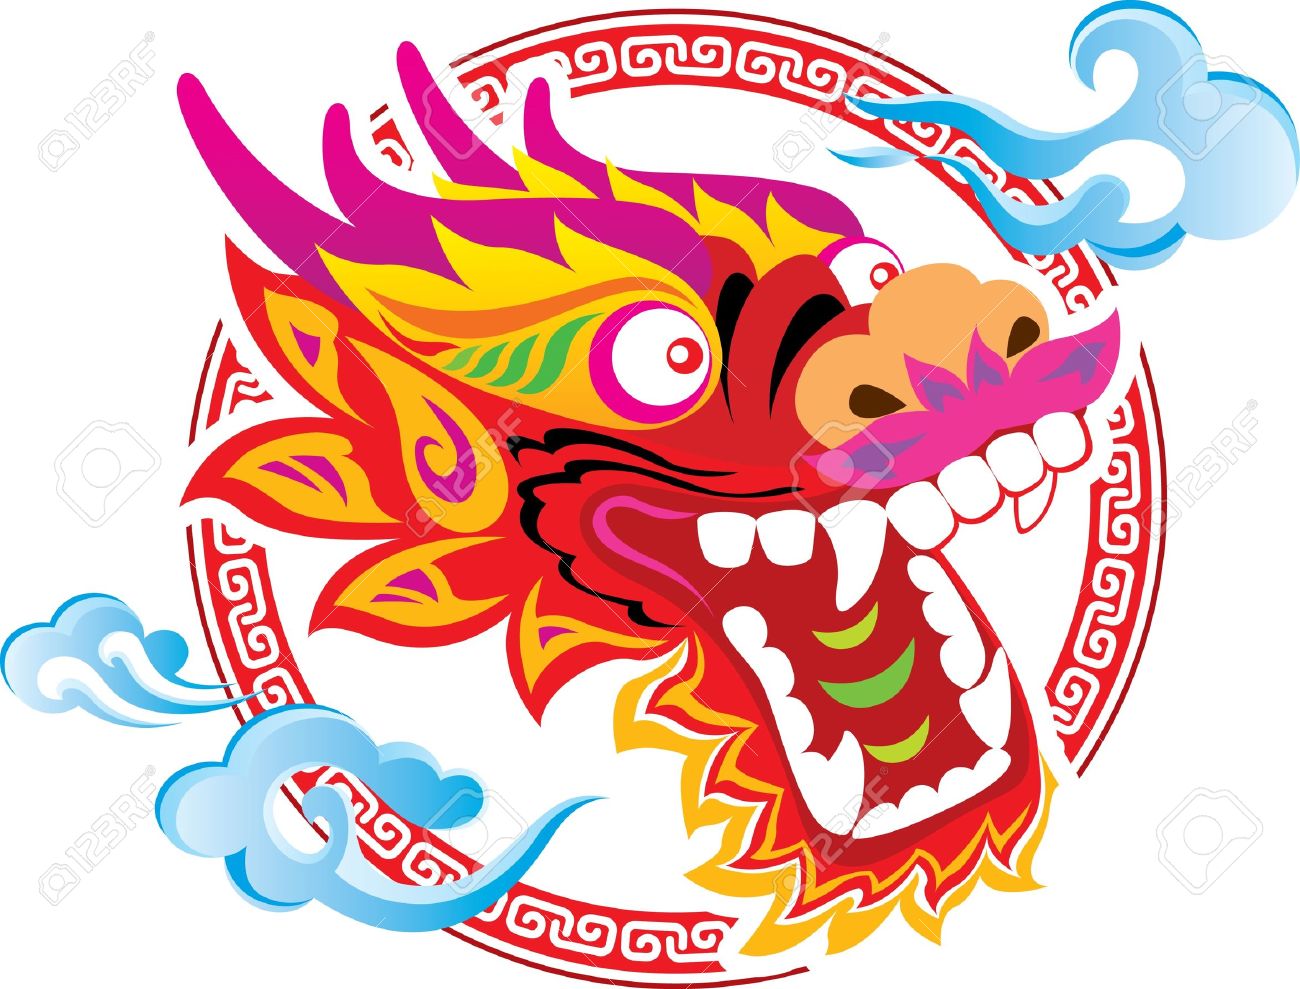 Chinese Dragon clipart #11, Download drawings